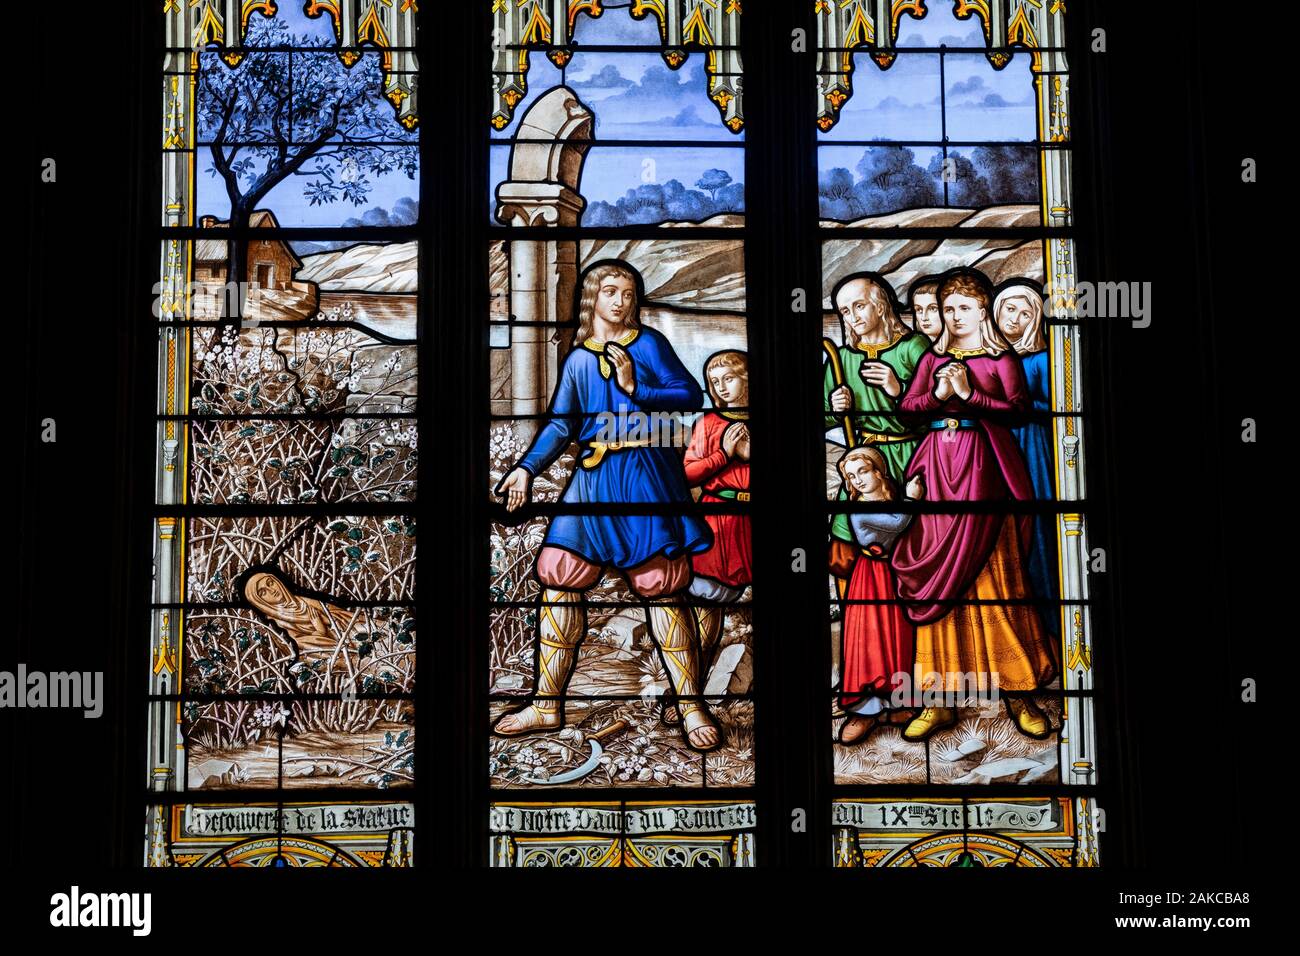 France, Morbihan, Josselin, medieval village, basilica Notre Dame du Roncier, stained glass, discovery of the statue of Our Lady of the Roncier in the 9th century, Carmel workshop of Le Mans, Ferdinand Hucher, 1893 Stock Photo